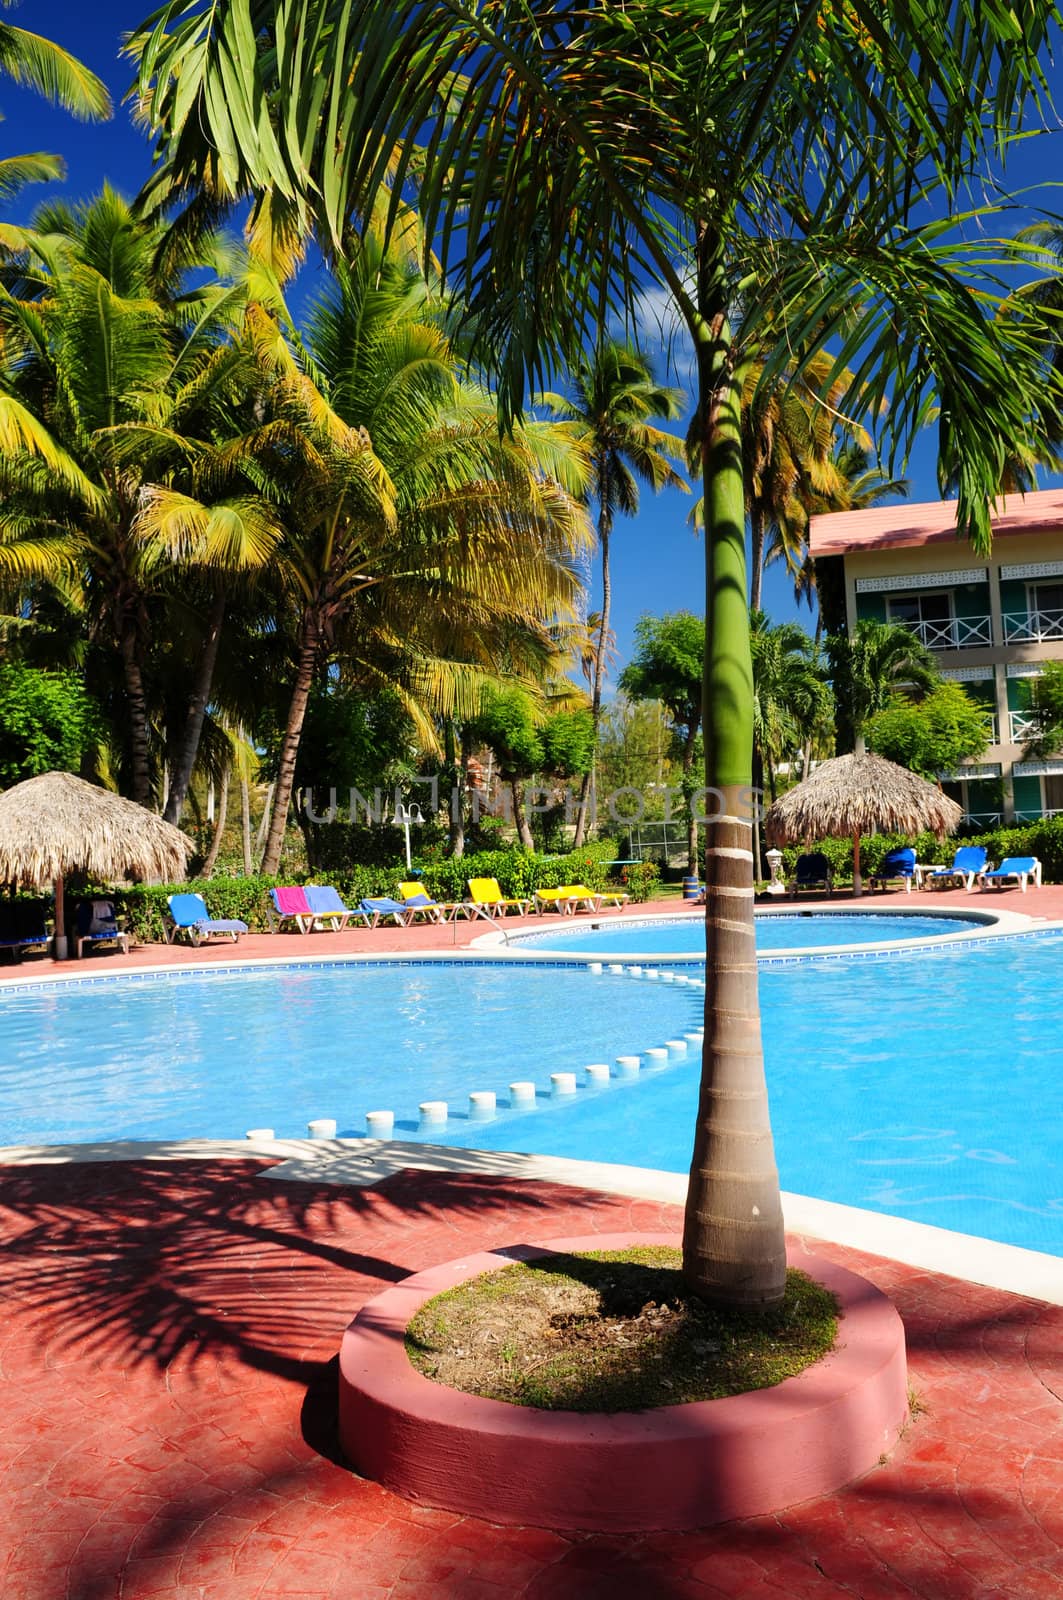 Swimming pool and hotel with palm trees at tropical resort